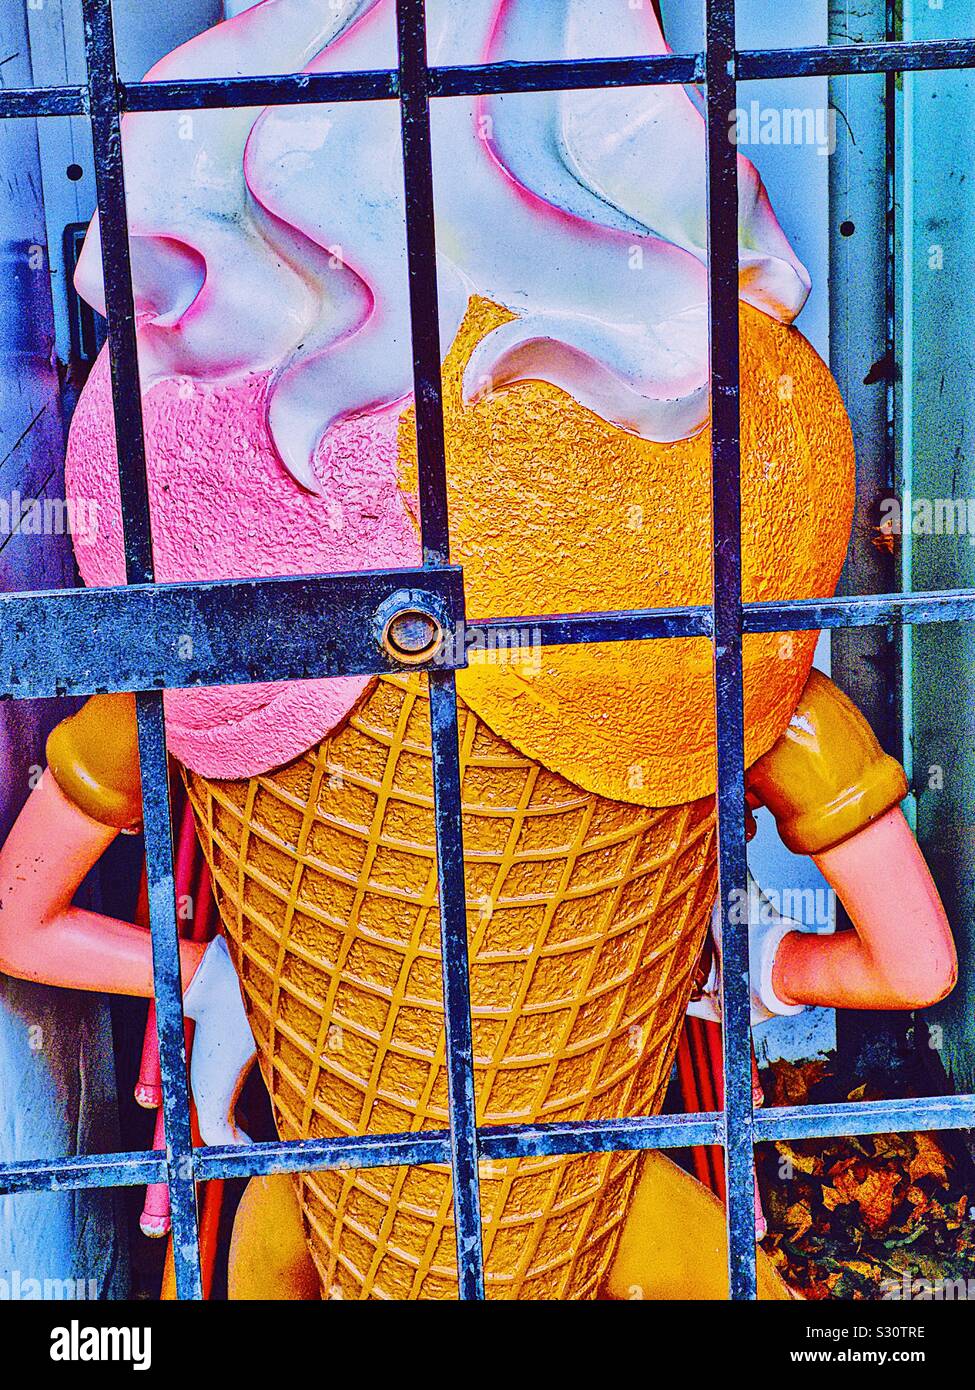 Giant plastic icecream with arms behind bars in winter storage, Sweden Stock Photo